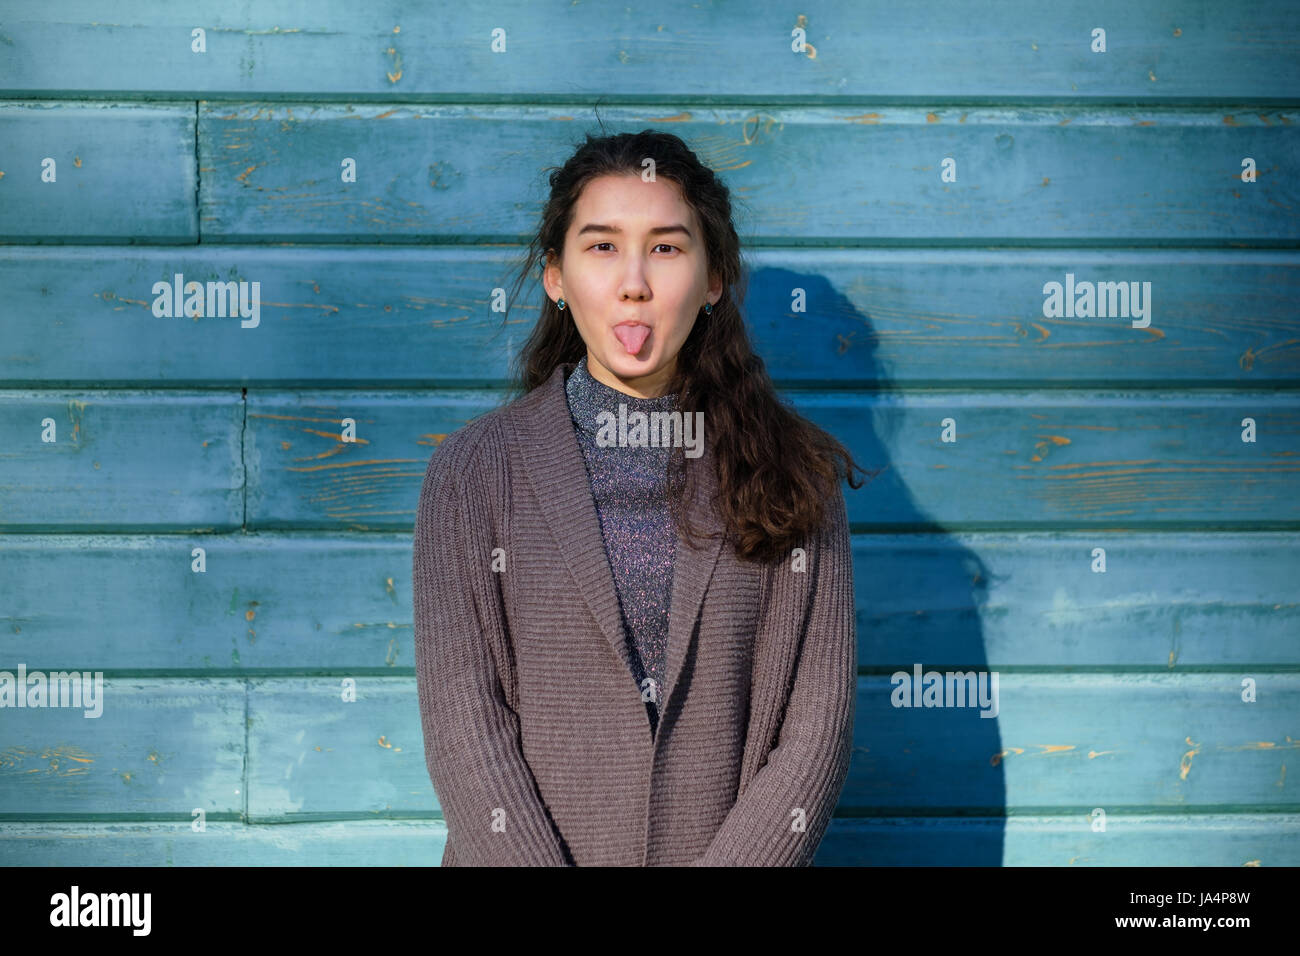 A beautiful Asian girl fools around and shows her tongue. She stands by the wooden blue wall. She wears a warm jacket. Stock Photo